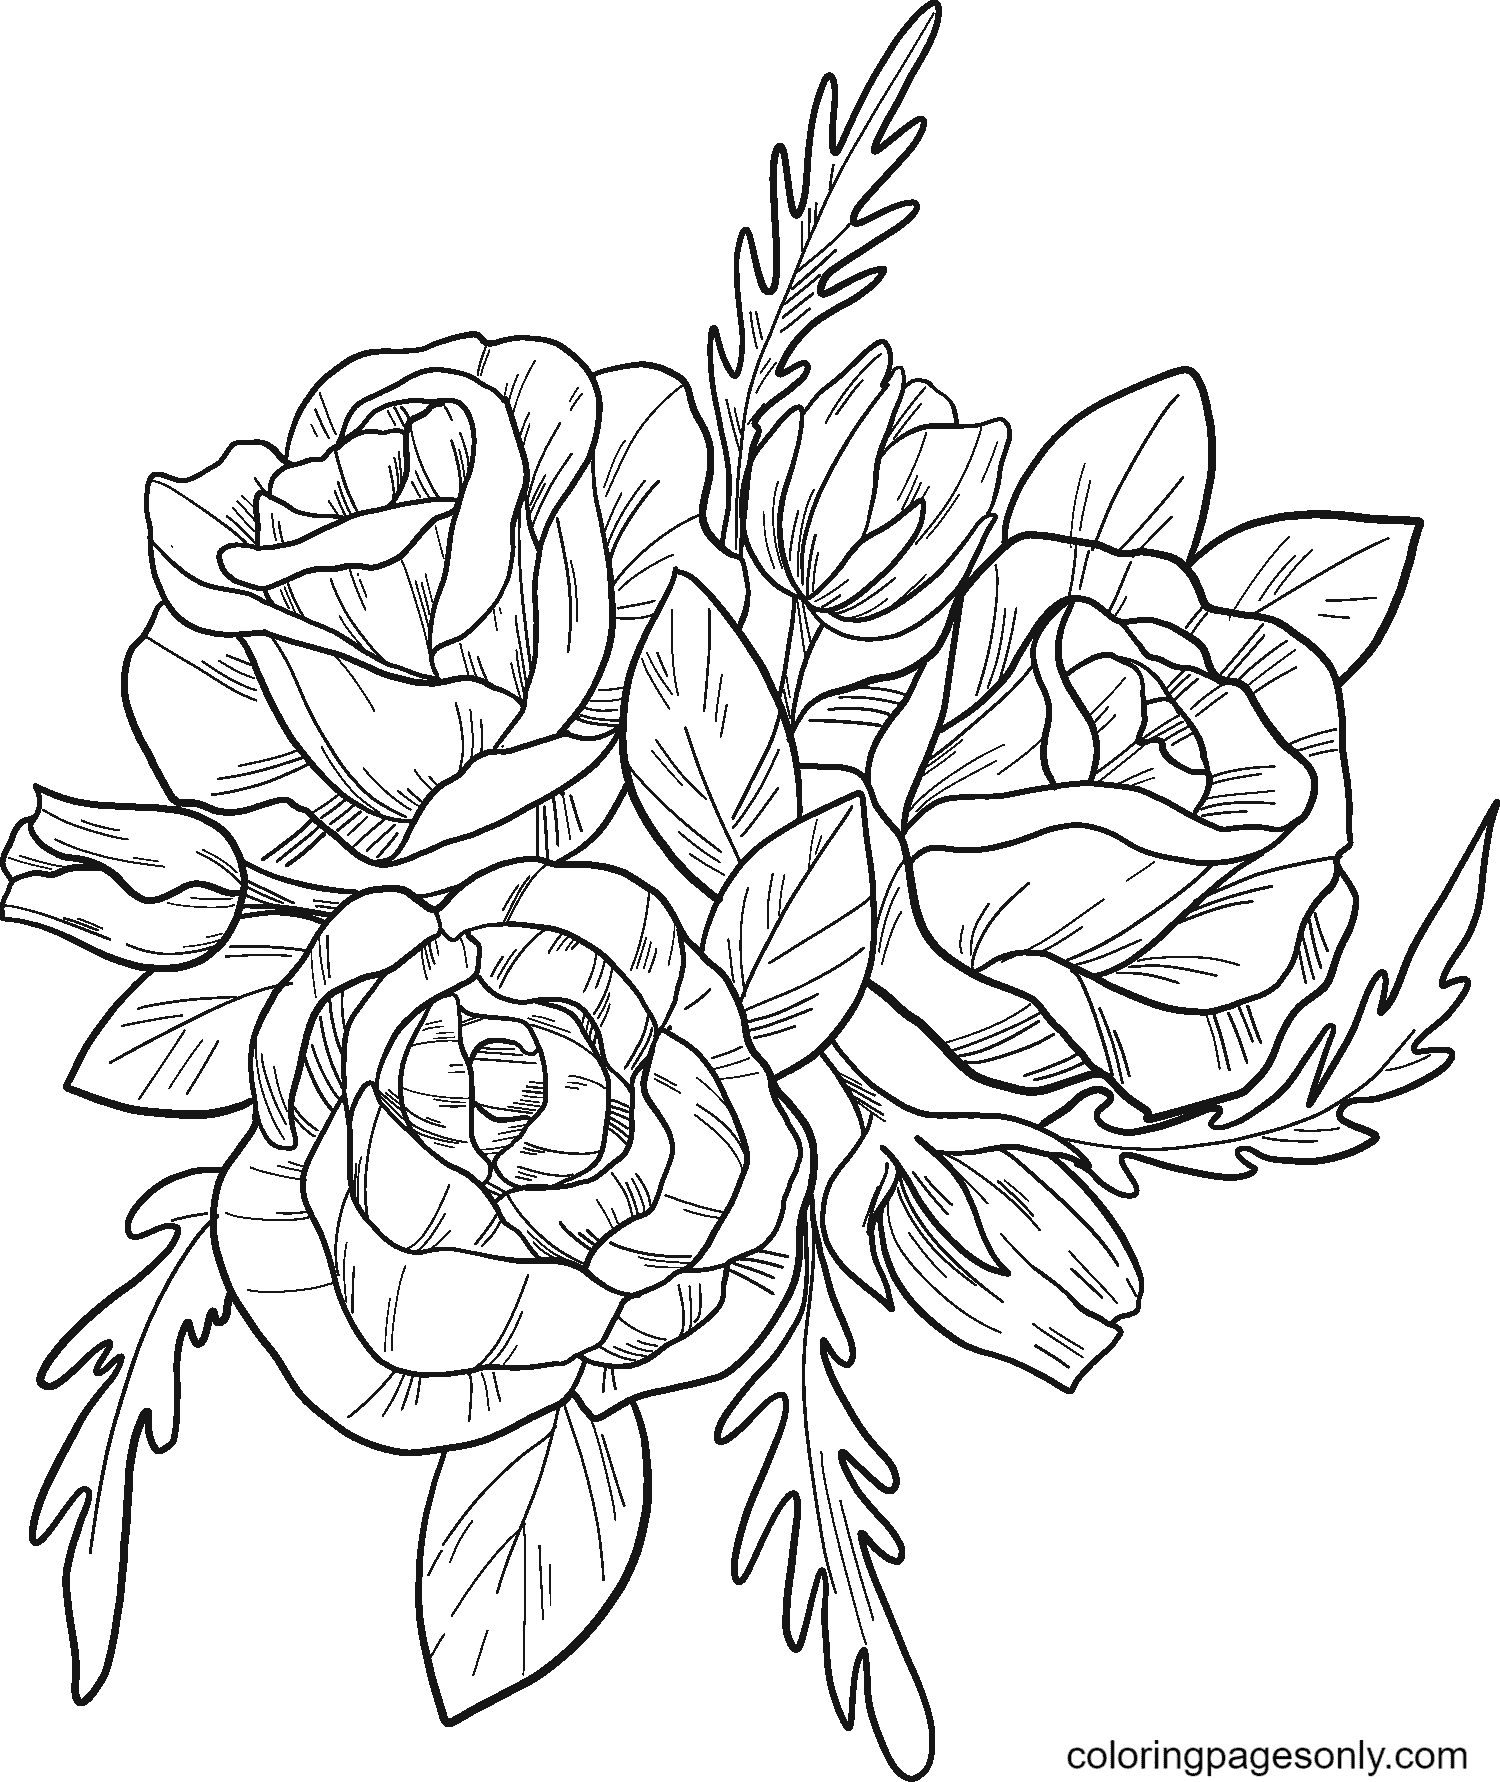 A Beautiful Bouquet of Roses Coloring Pages   Rose Coloring Pages ...